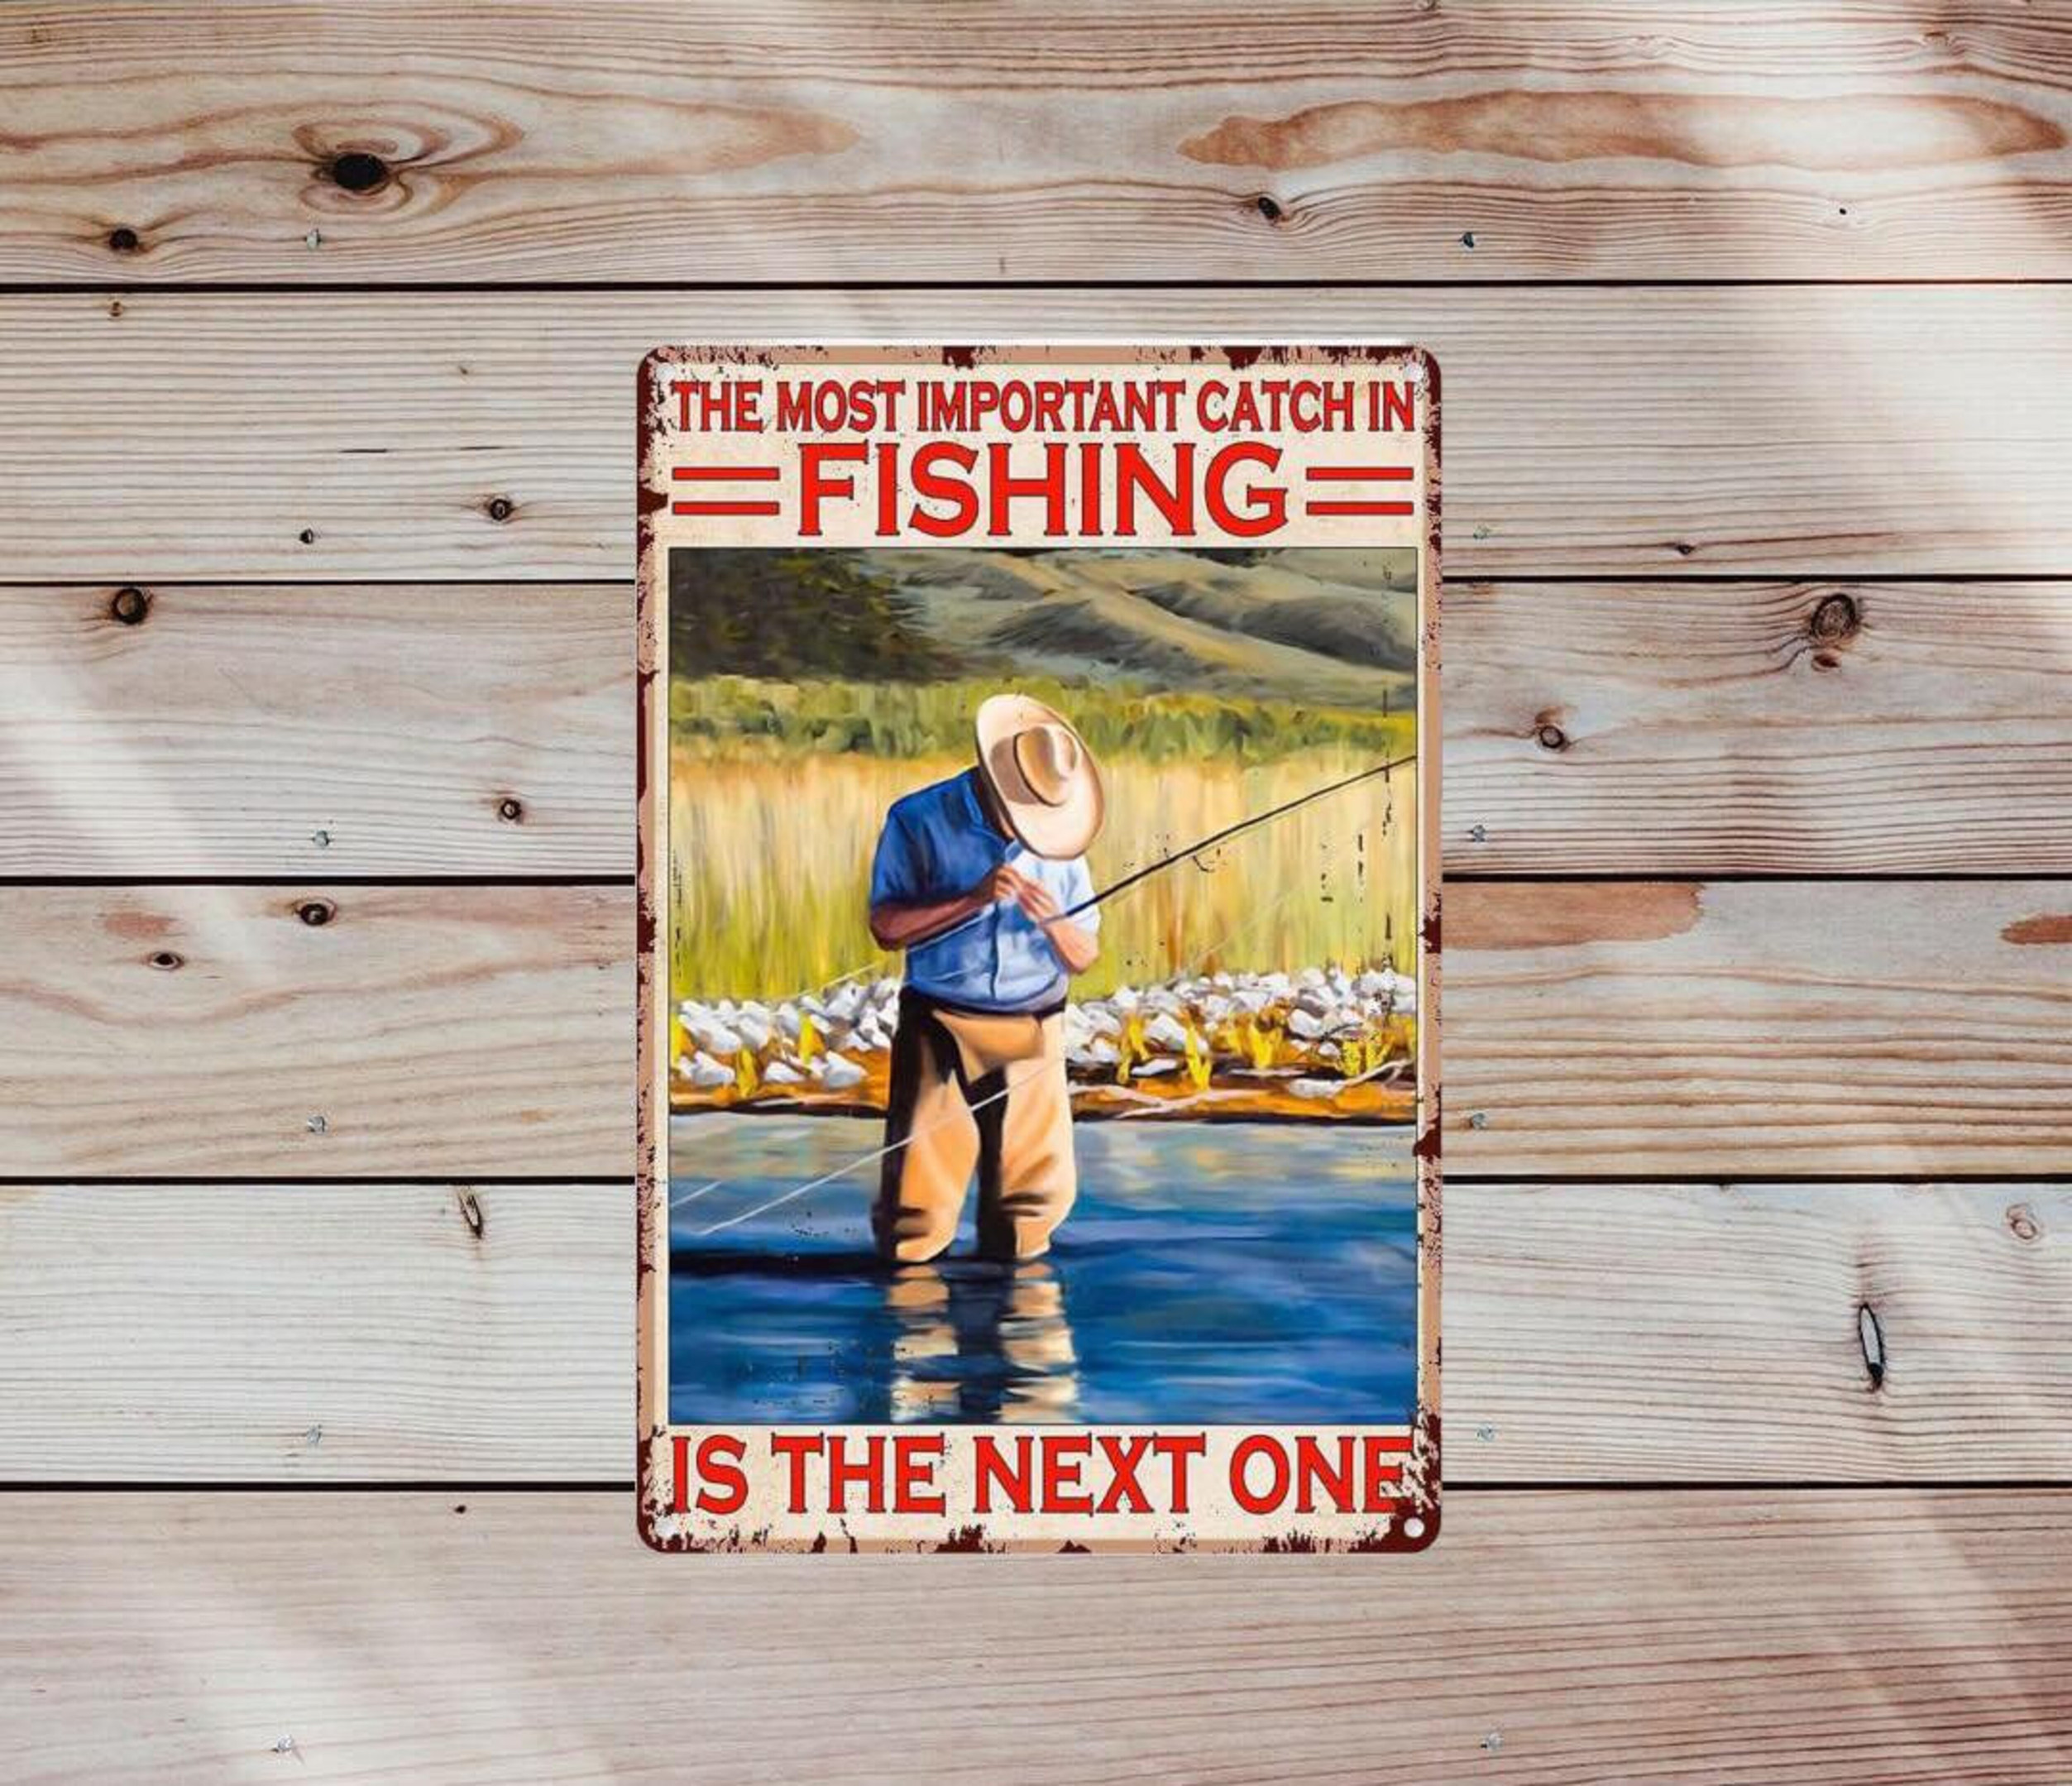 Retro Metal Sign | The Most Important Catch in Fishing is The Next One Metal Sign | Fishing Fish Decor | Wall Poster Outdoor Decor  in